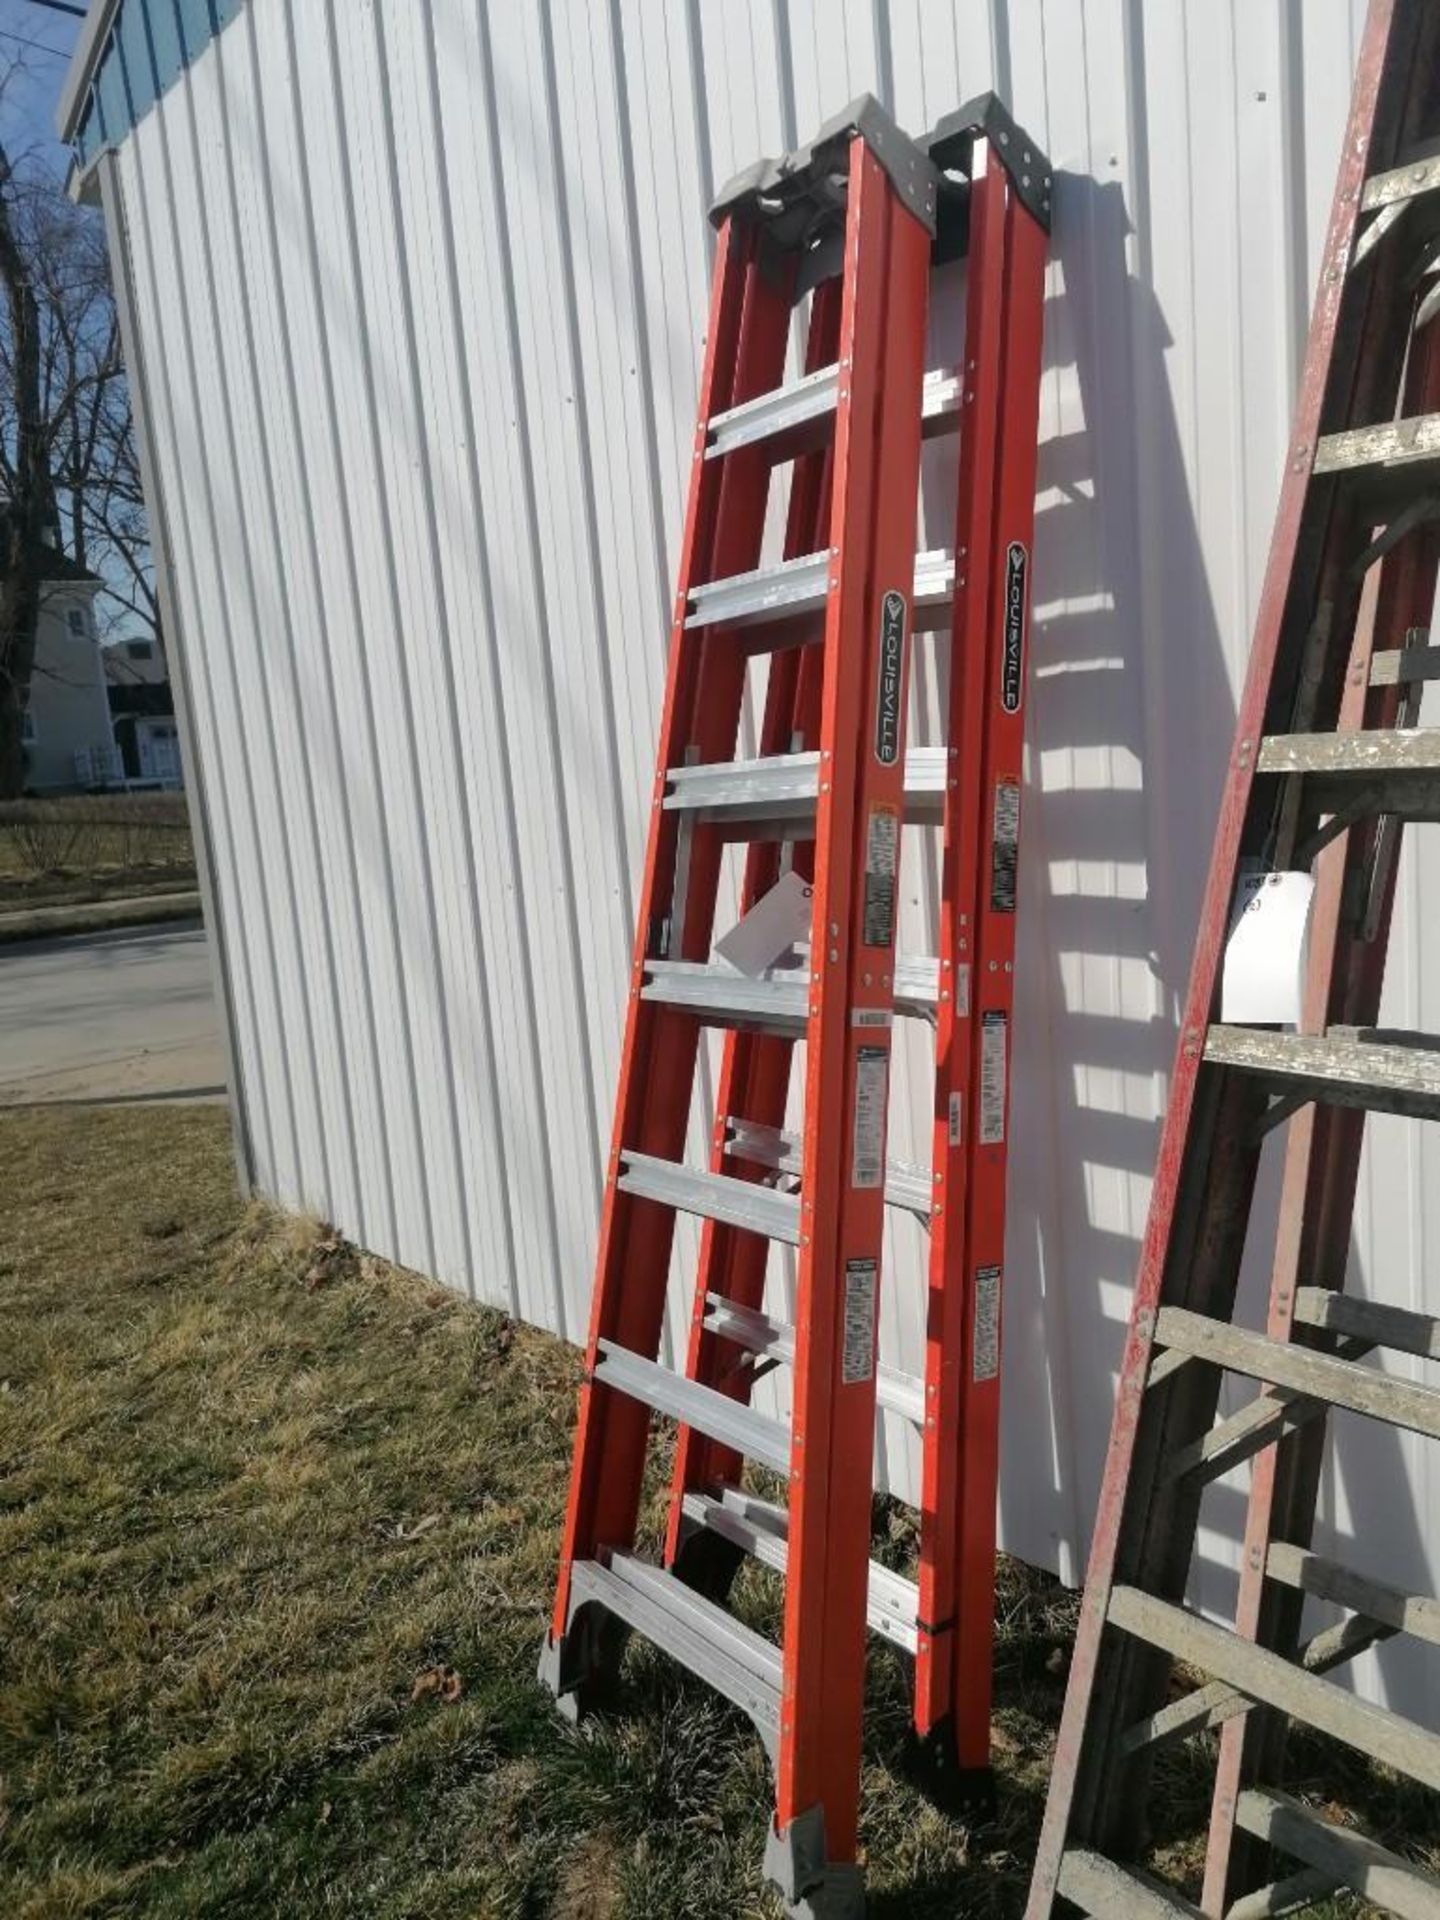 (2) NEW Louisville 8' Step Ladders. Located in Mt. Pleasant, IA.